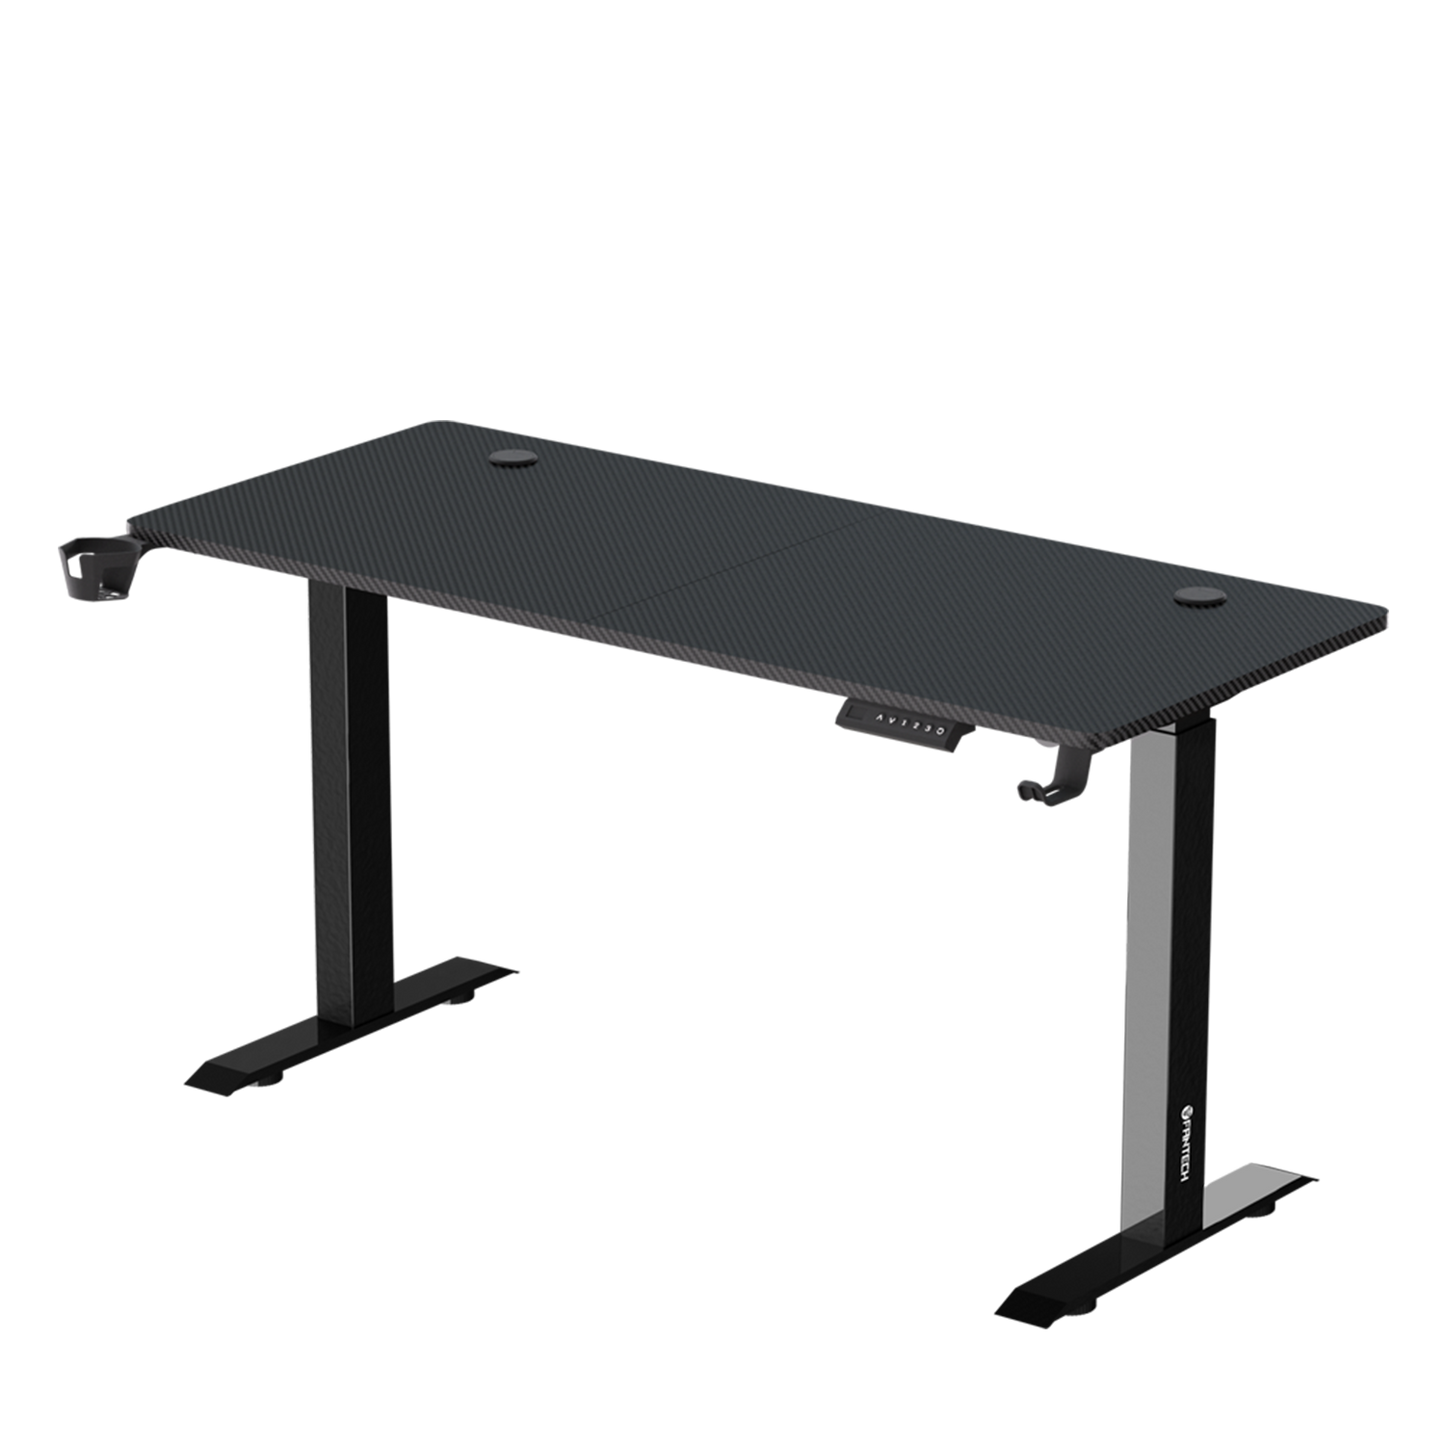 Fantech Office Desk Height Adjustable Motorised Electric Stand Gaming Table 140x60cm (GD914) (Black)